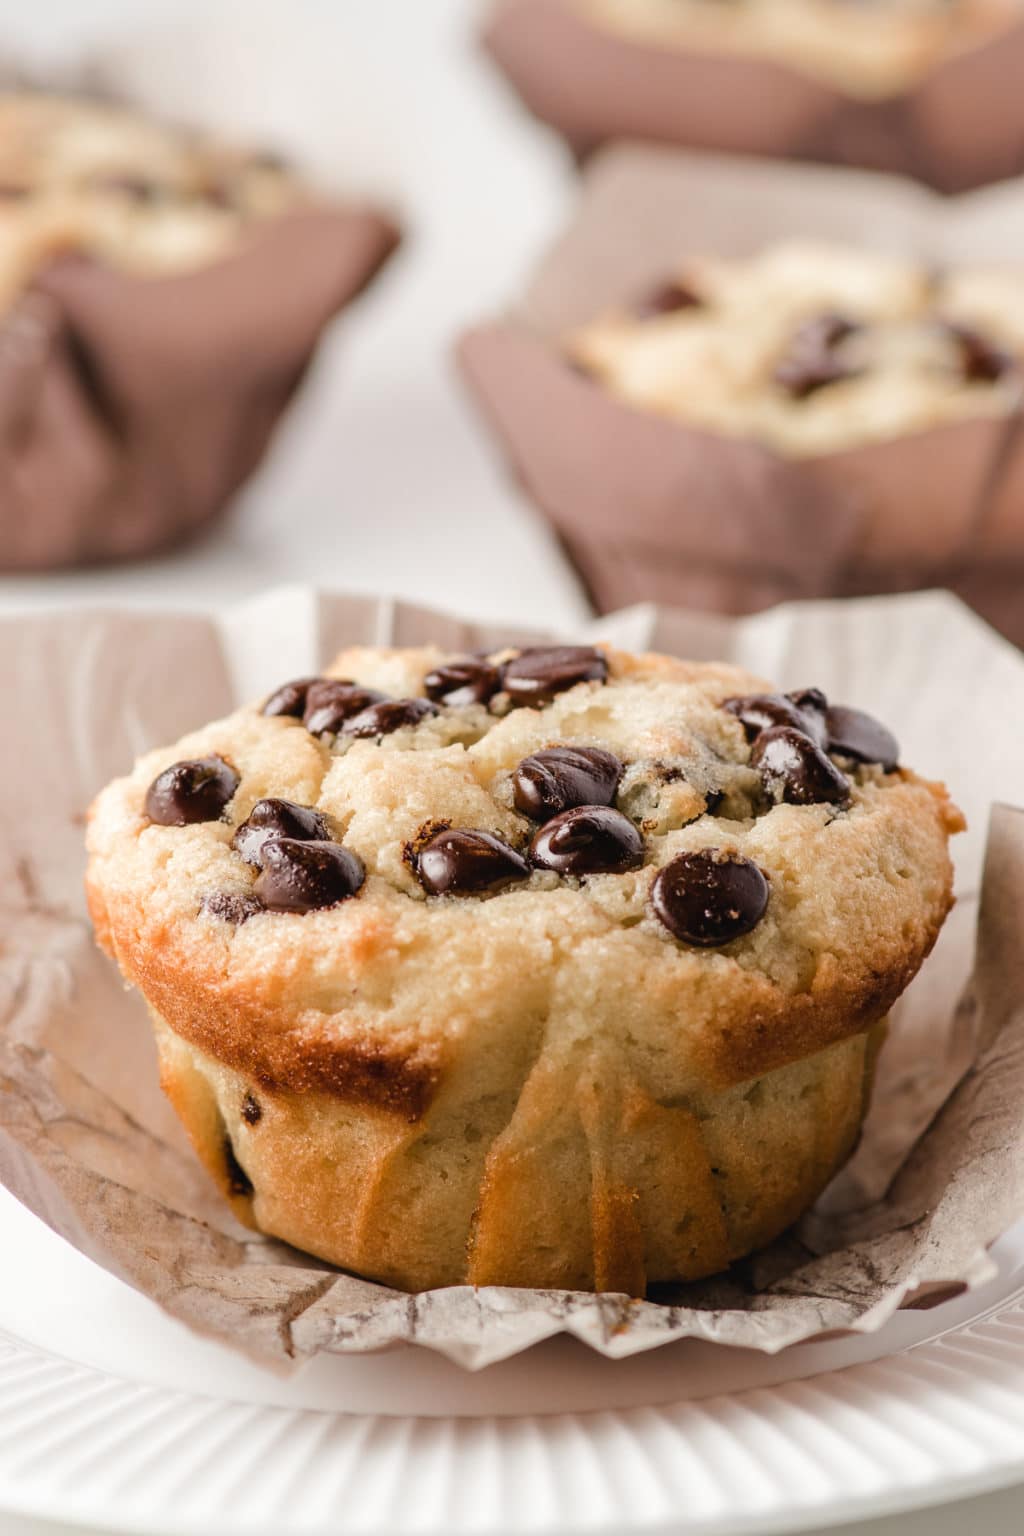 An up close photograph of a bakery style chocolate chip muffin unwrapped on a white plate